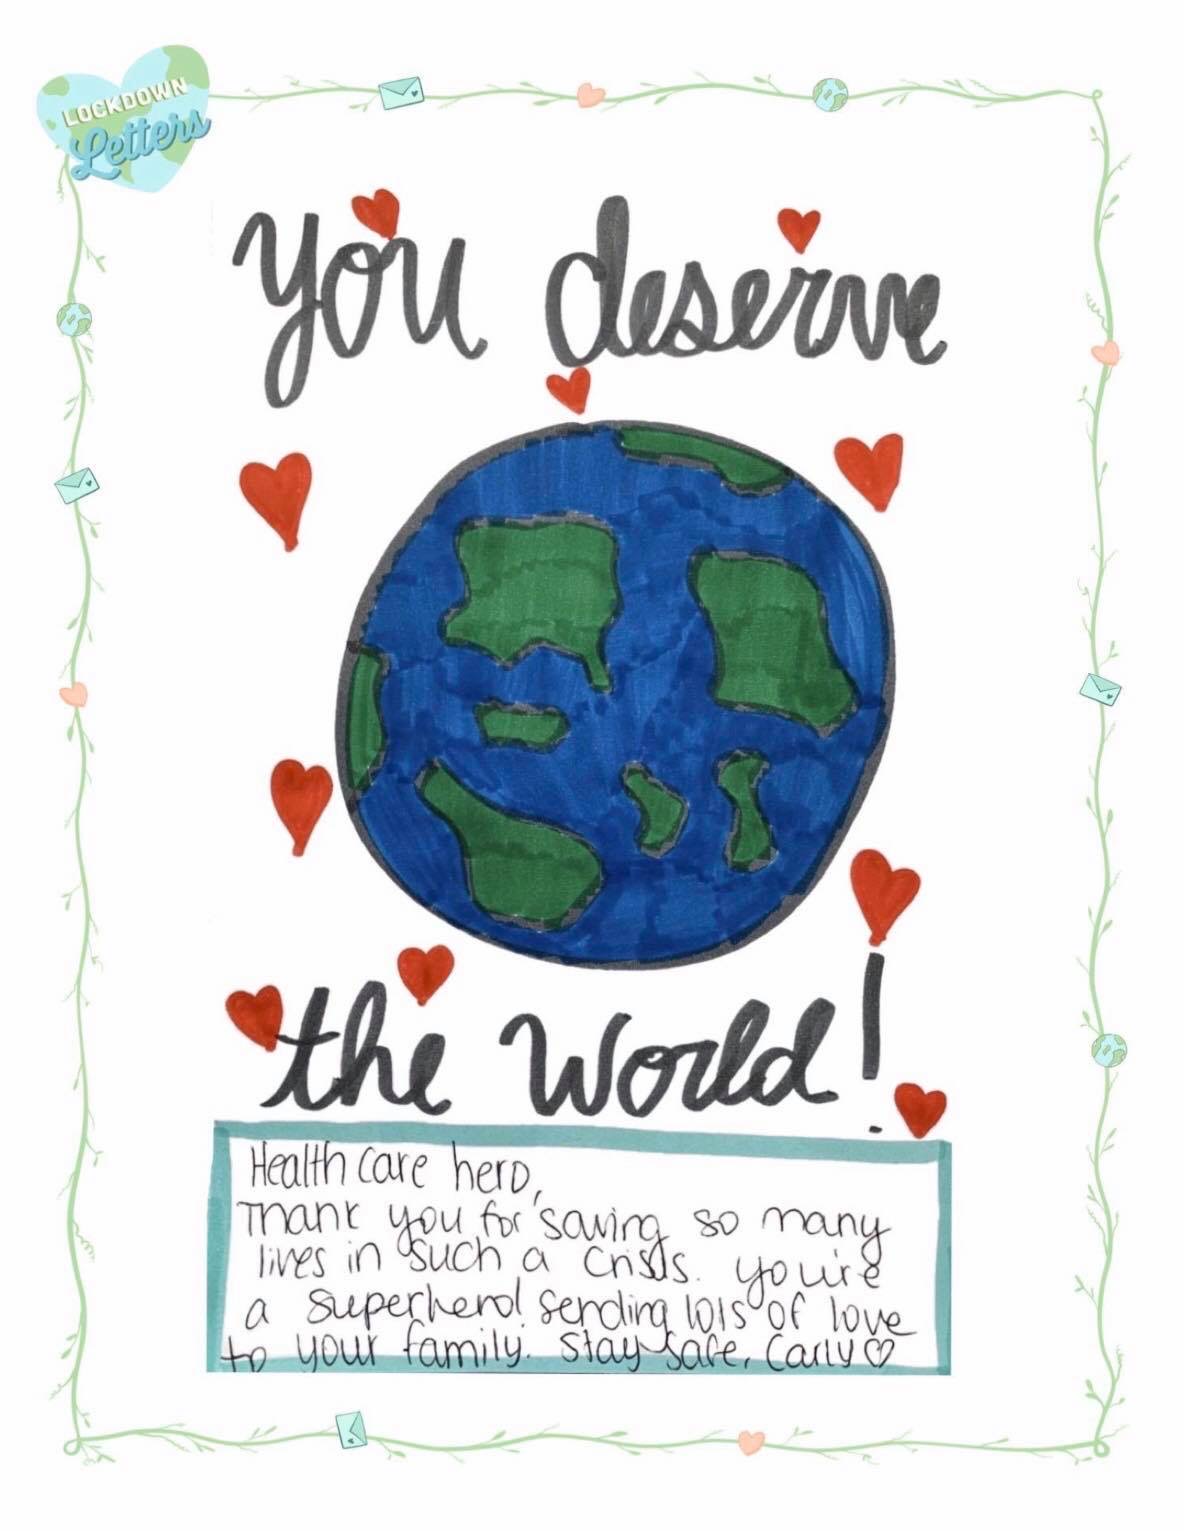 A letter to a health care professional with a picture of the globe that says "You deserve the world"